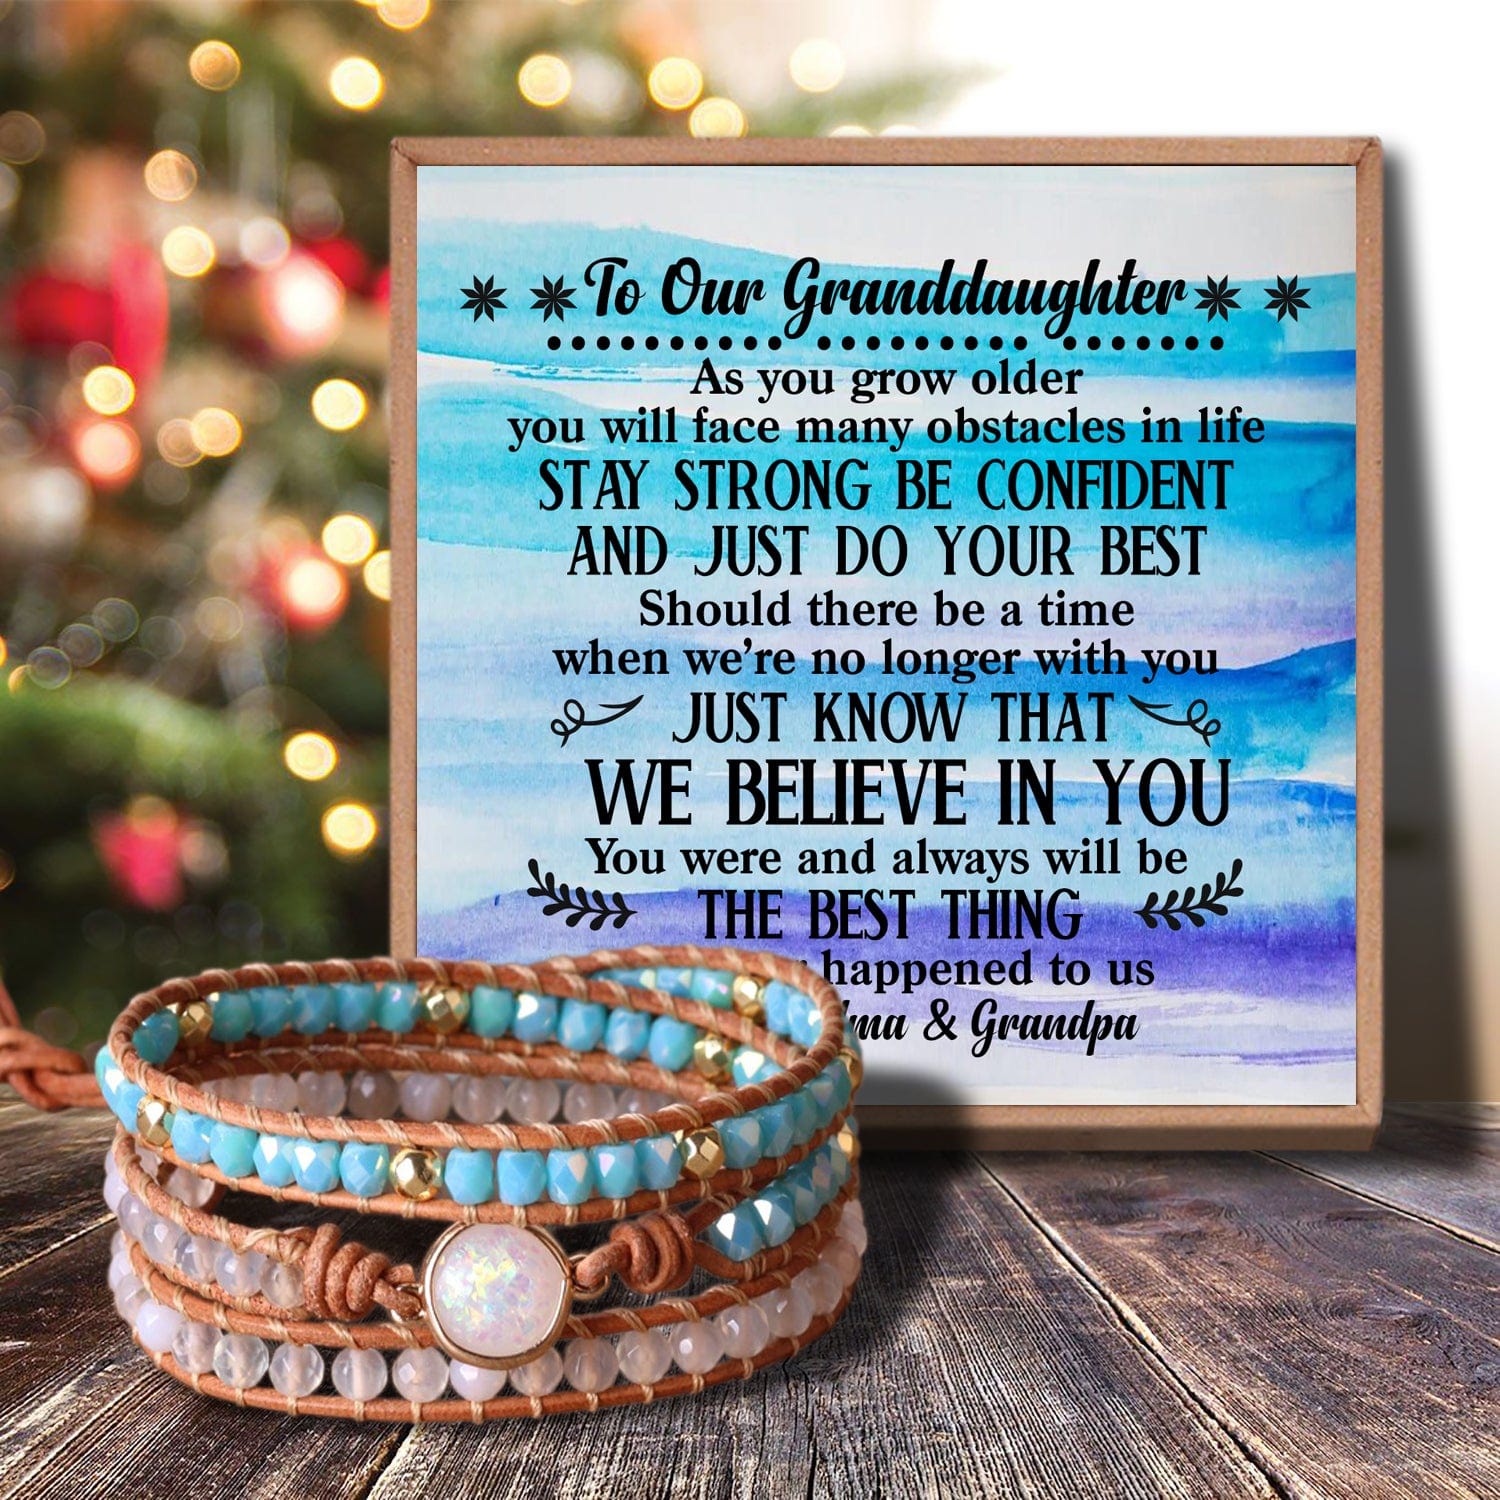 Bracelets For Granddaughter To Our Granddaughter - We Believe In You Crystal Beaded Bracelet GiveMe-Gifts